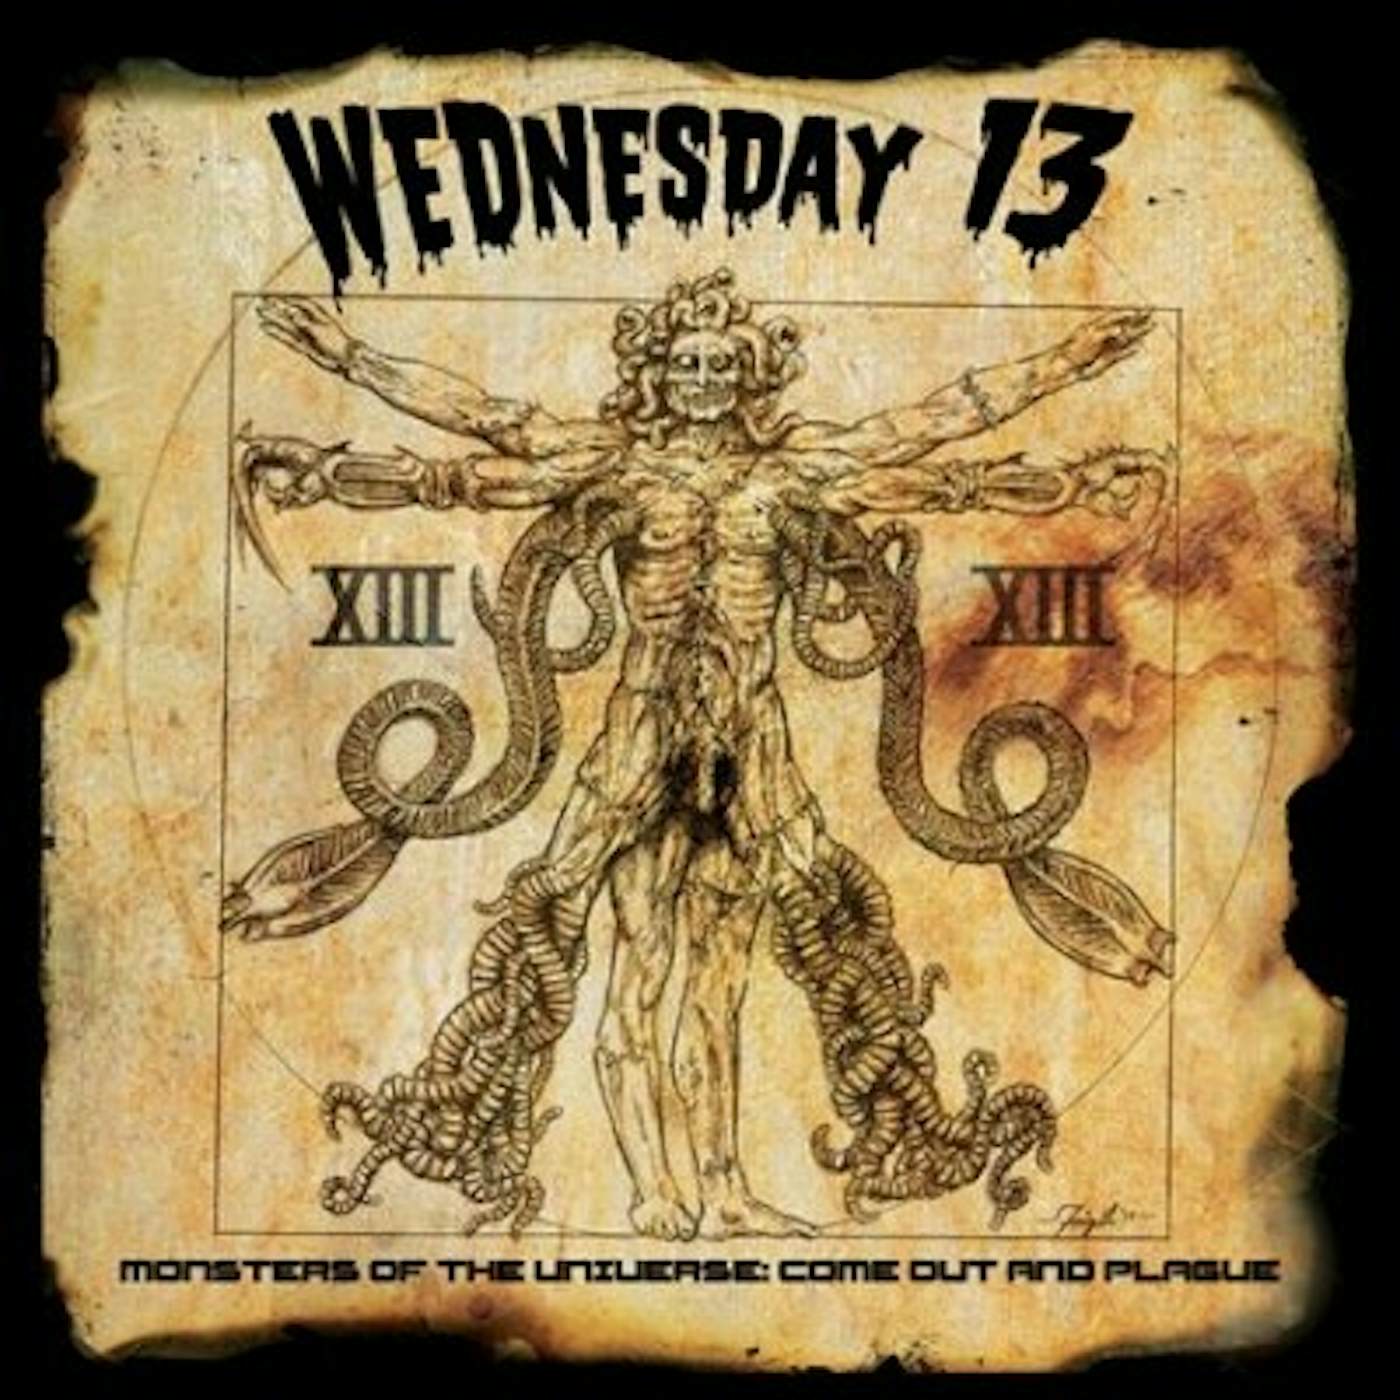 Wednesday 13 MONSTERS OF THE UNIVERSE: COME OUT & PLAGUE (X) (GOLD VINYL) Vinyl Record